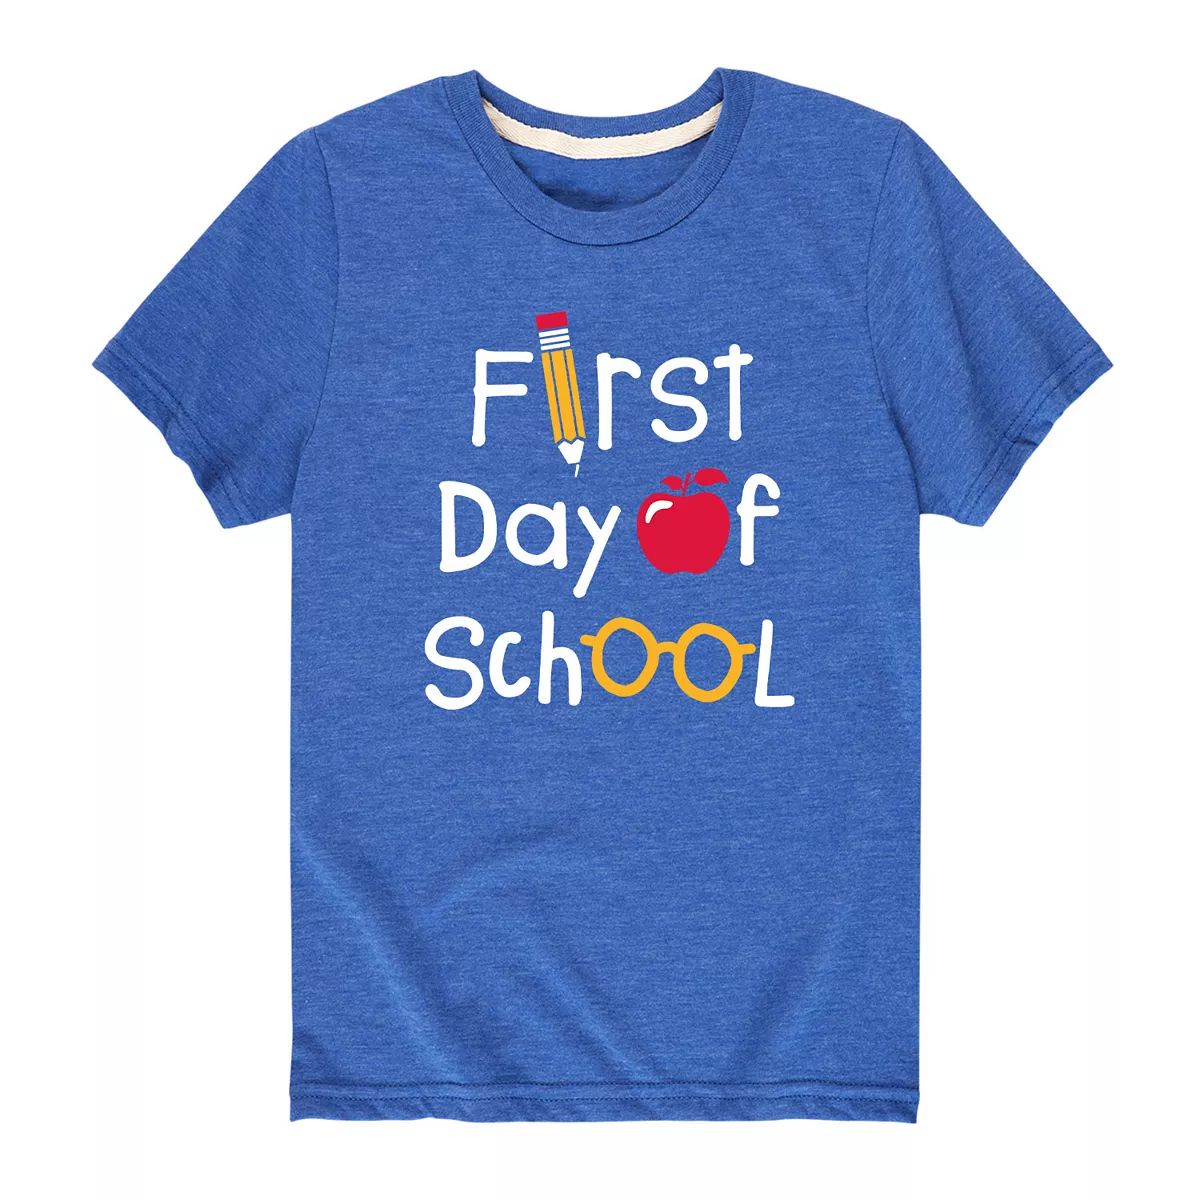 Boys 8-20 "First Day Of School" Graphic Tee | Kohl's